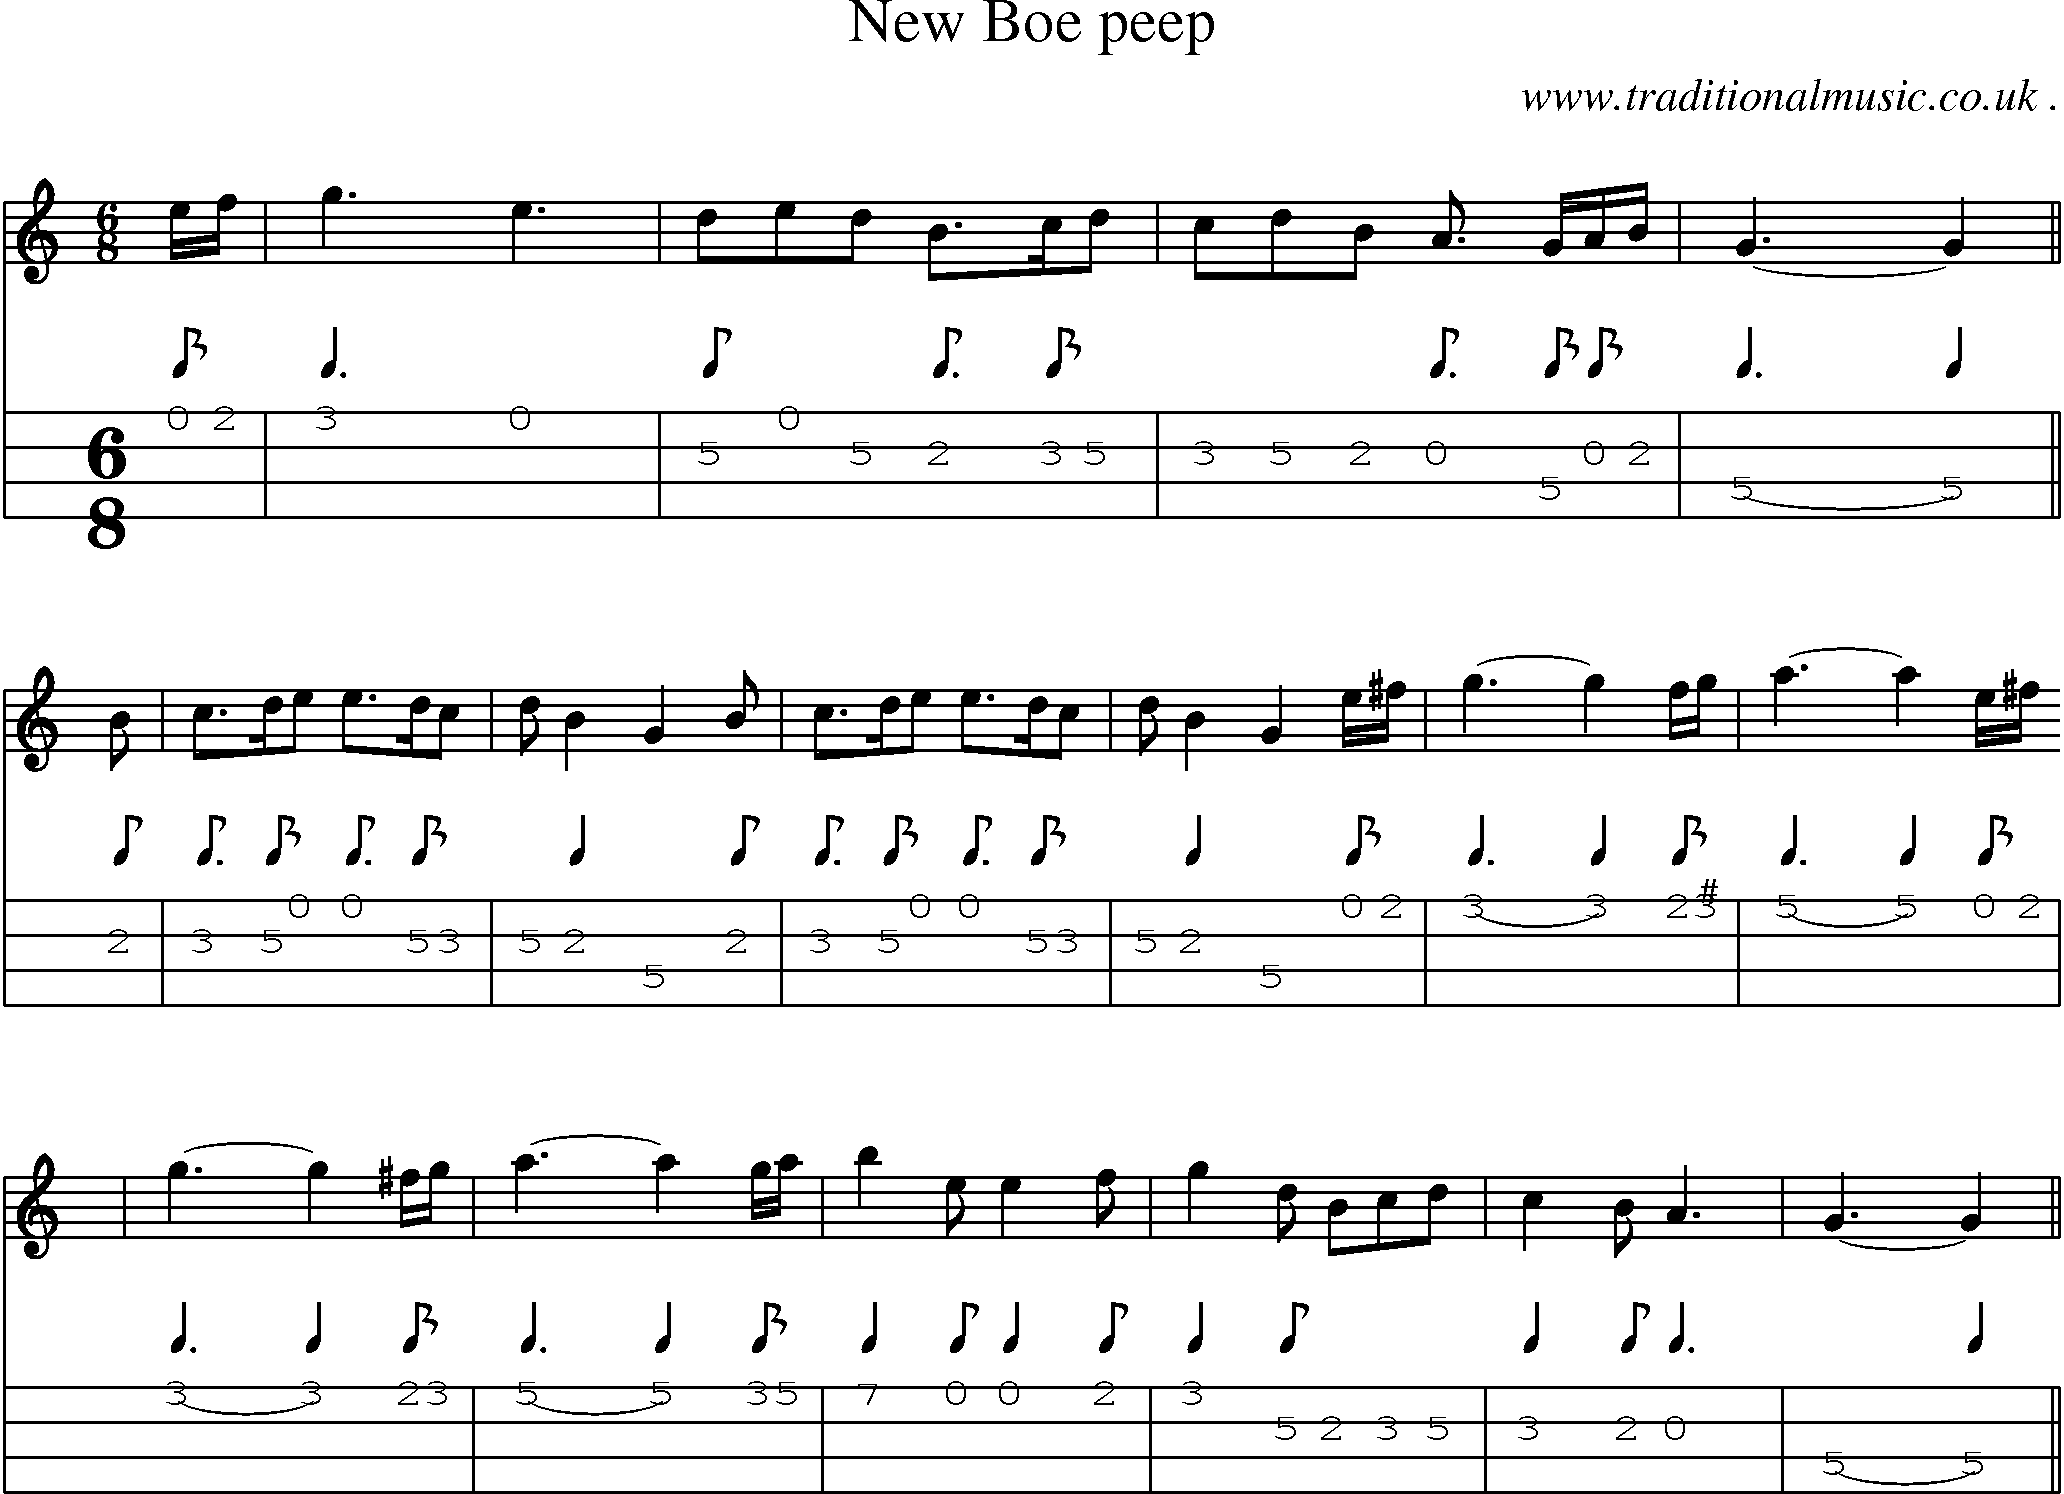 Sheet-Music and Mandolin Tabs for New Boe Peep